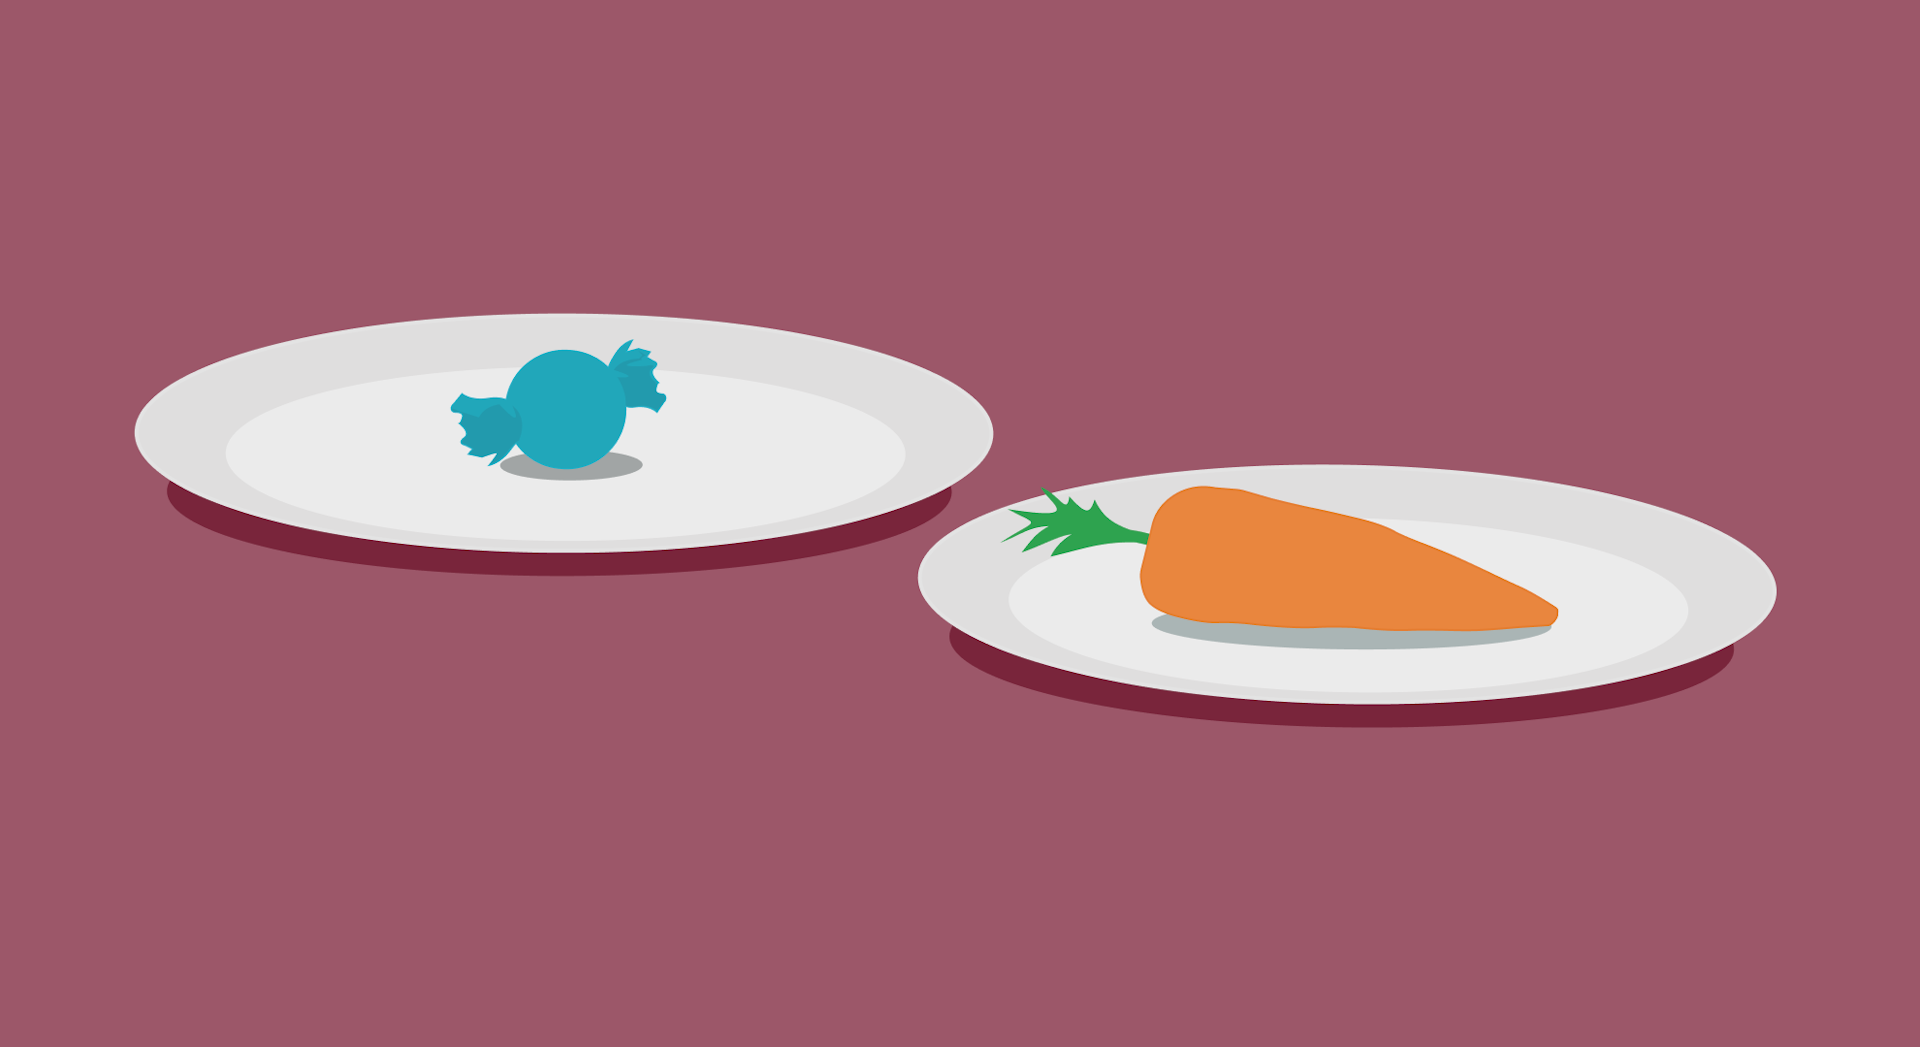 One plate with a sweet, one plate with a carrot. 